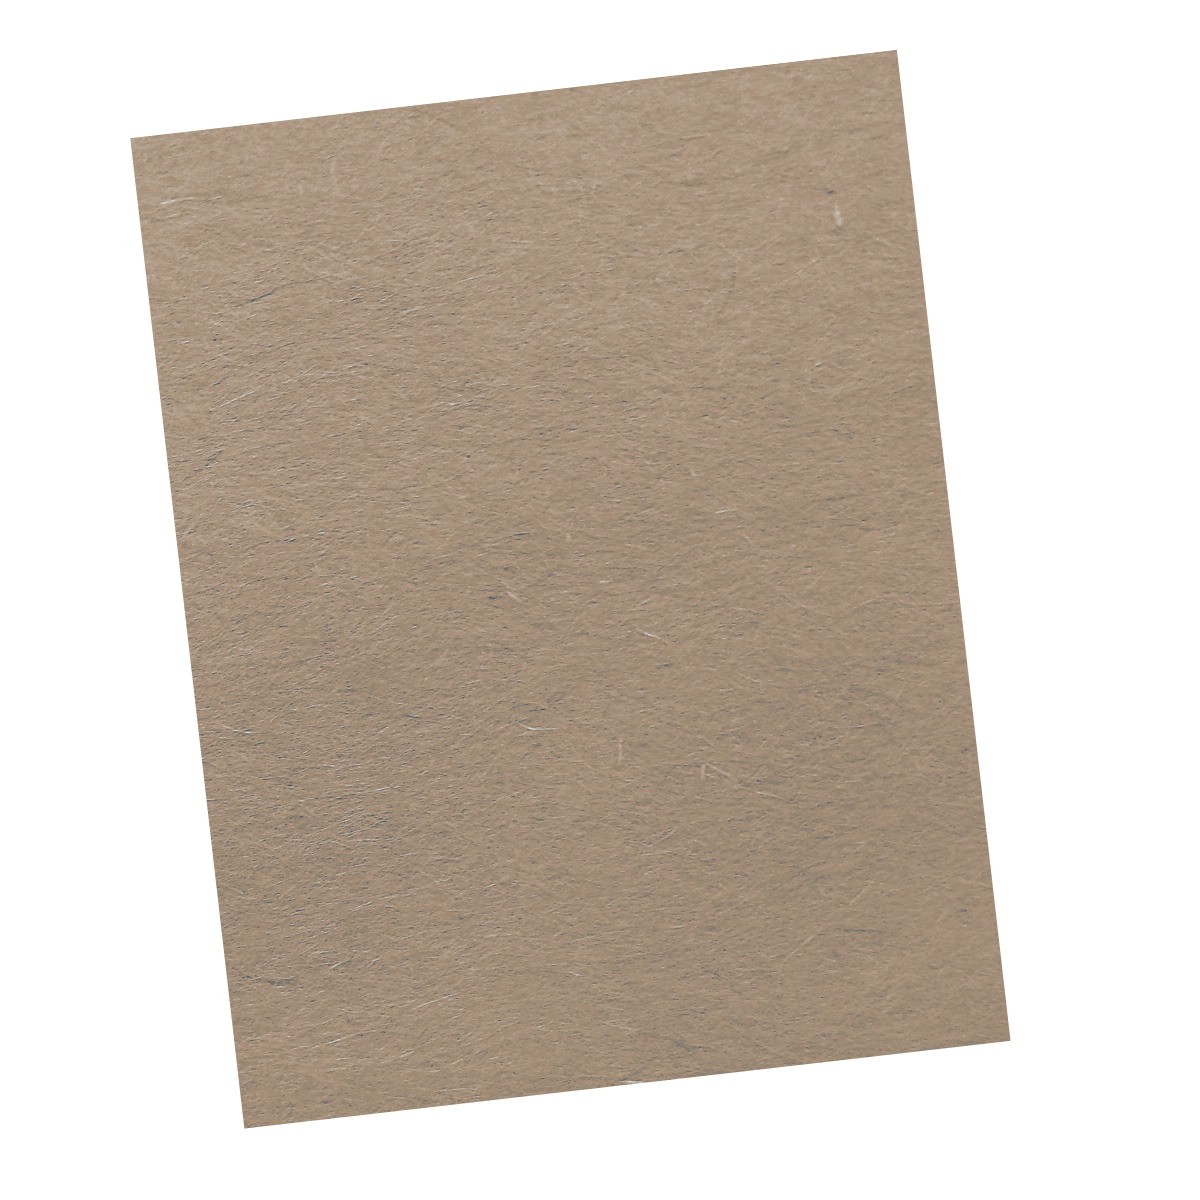 19 X 26" Multi-Purpose Smooth Surfaced Chipboard, 10-Ply Thickness - 10/Pkg - 456857